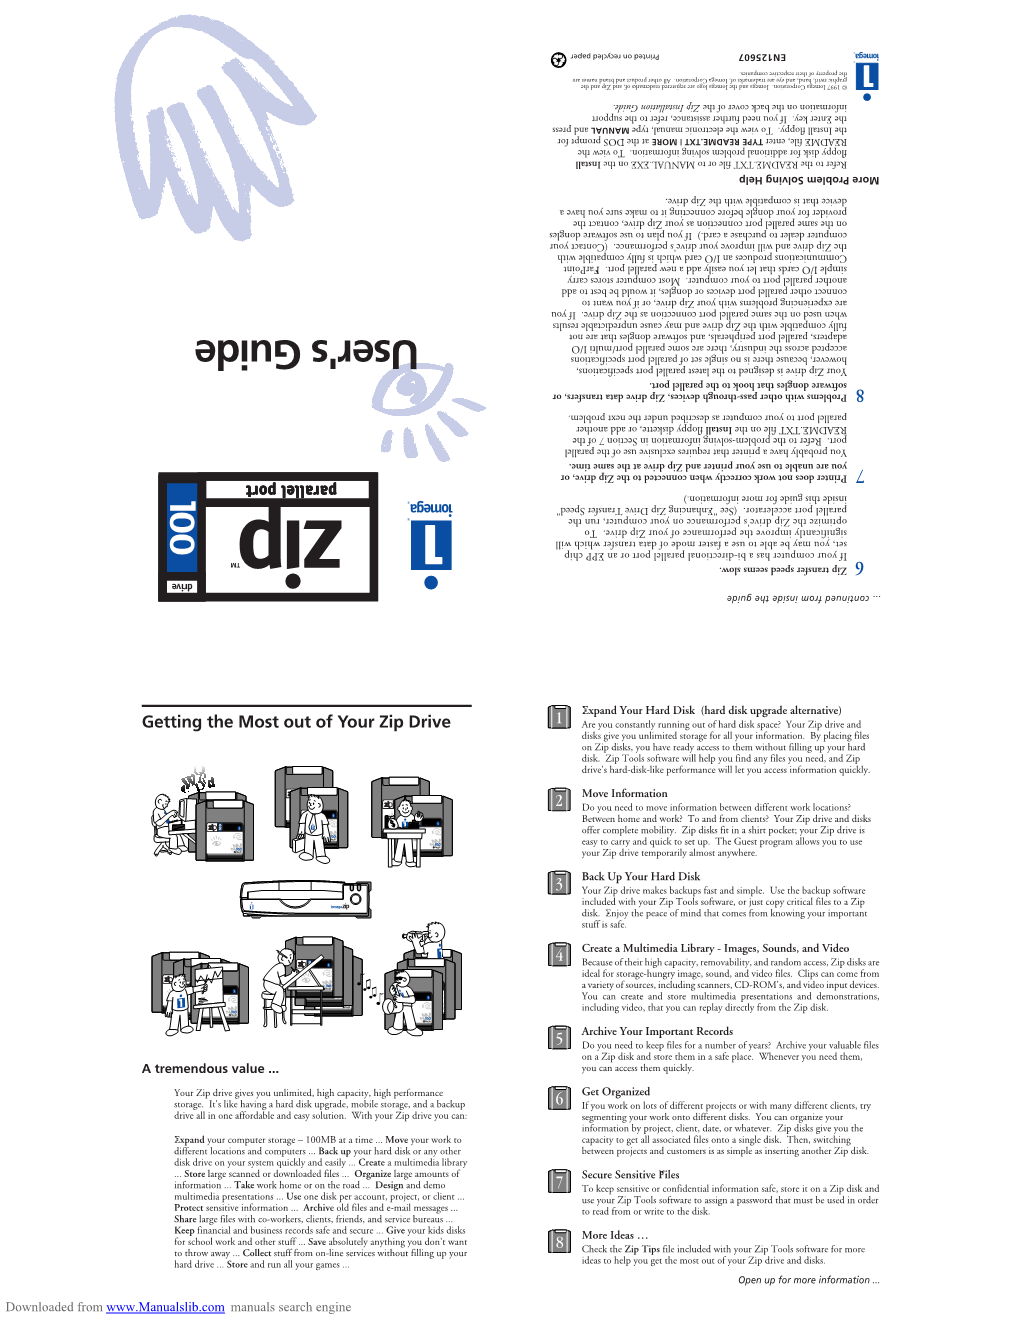 Iomega Zip Tools Windows Group Or to the README.TXT File on the Install Floppy Diskette